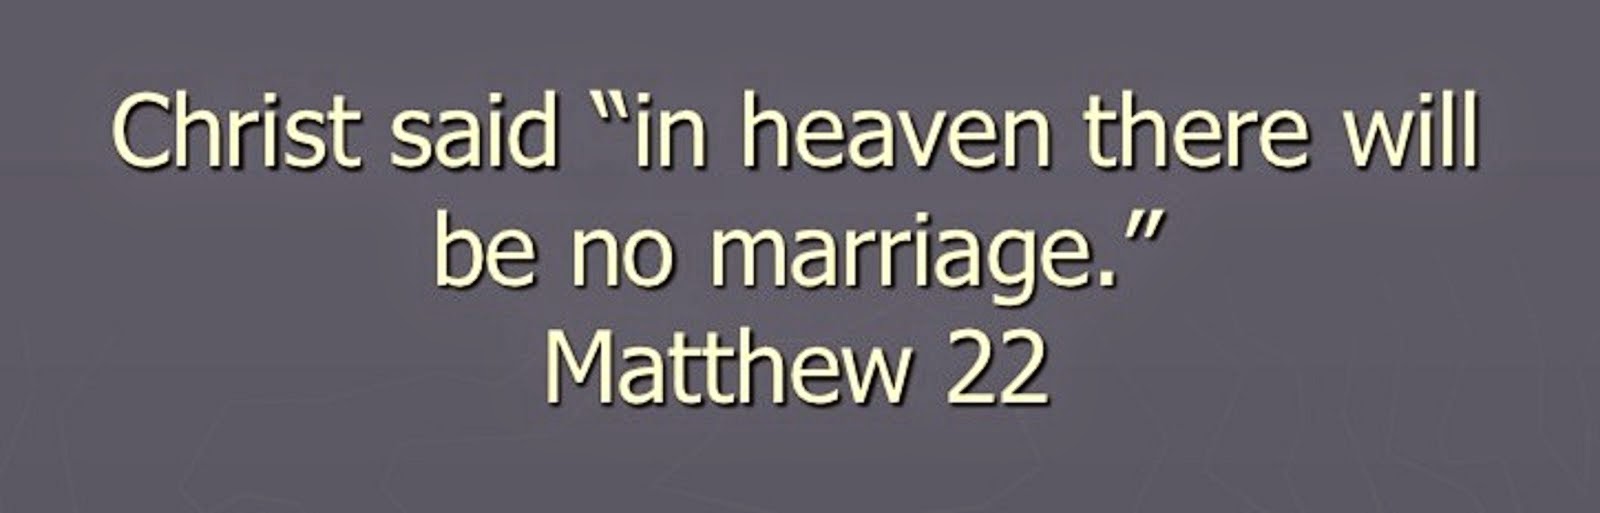 "CHRIST SAID,  "IN HEAVEN  THERE WILL BE NO MARRIAGE.